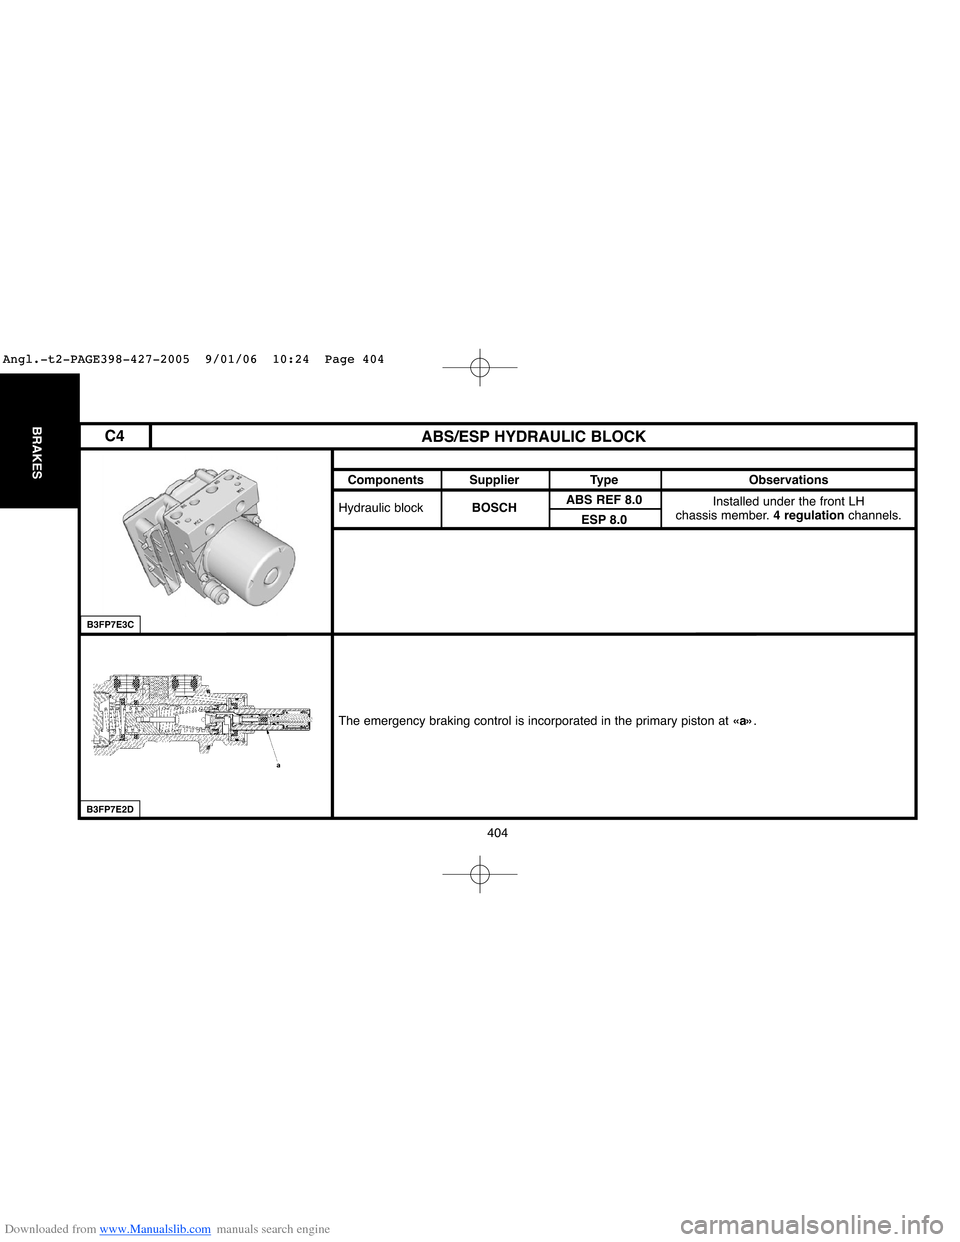 Citroen C4 2005 2.G User Guide Downloaded from www.Manualslib.com manuals search engine 404
BRAKES
B3FP7E2D
ABS/ESP HYDRAULIC BLOCK
Components Supplier Type Observations
Hydraulic blockBOSCHABS REF 8.0
Installed under the front LH 